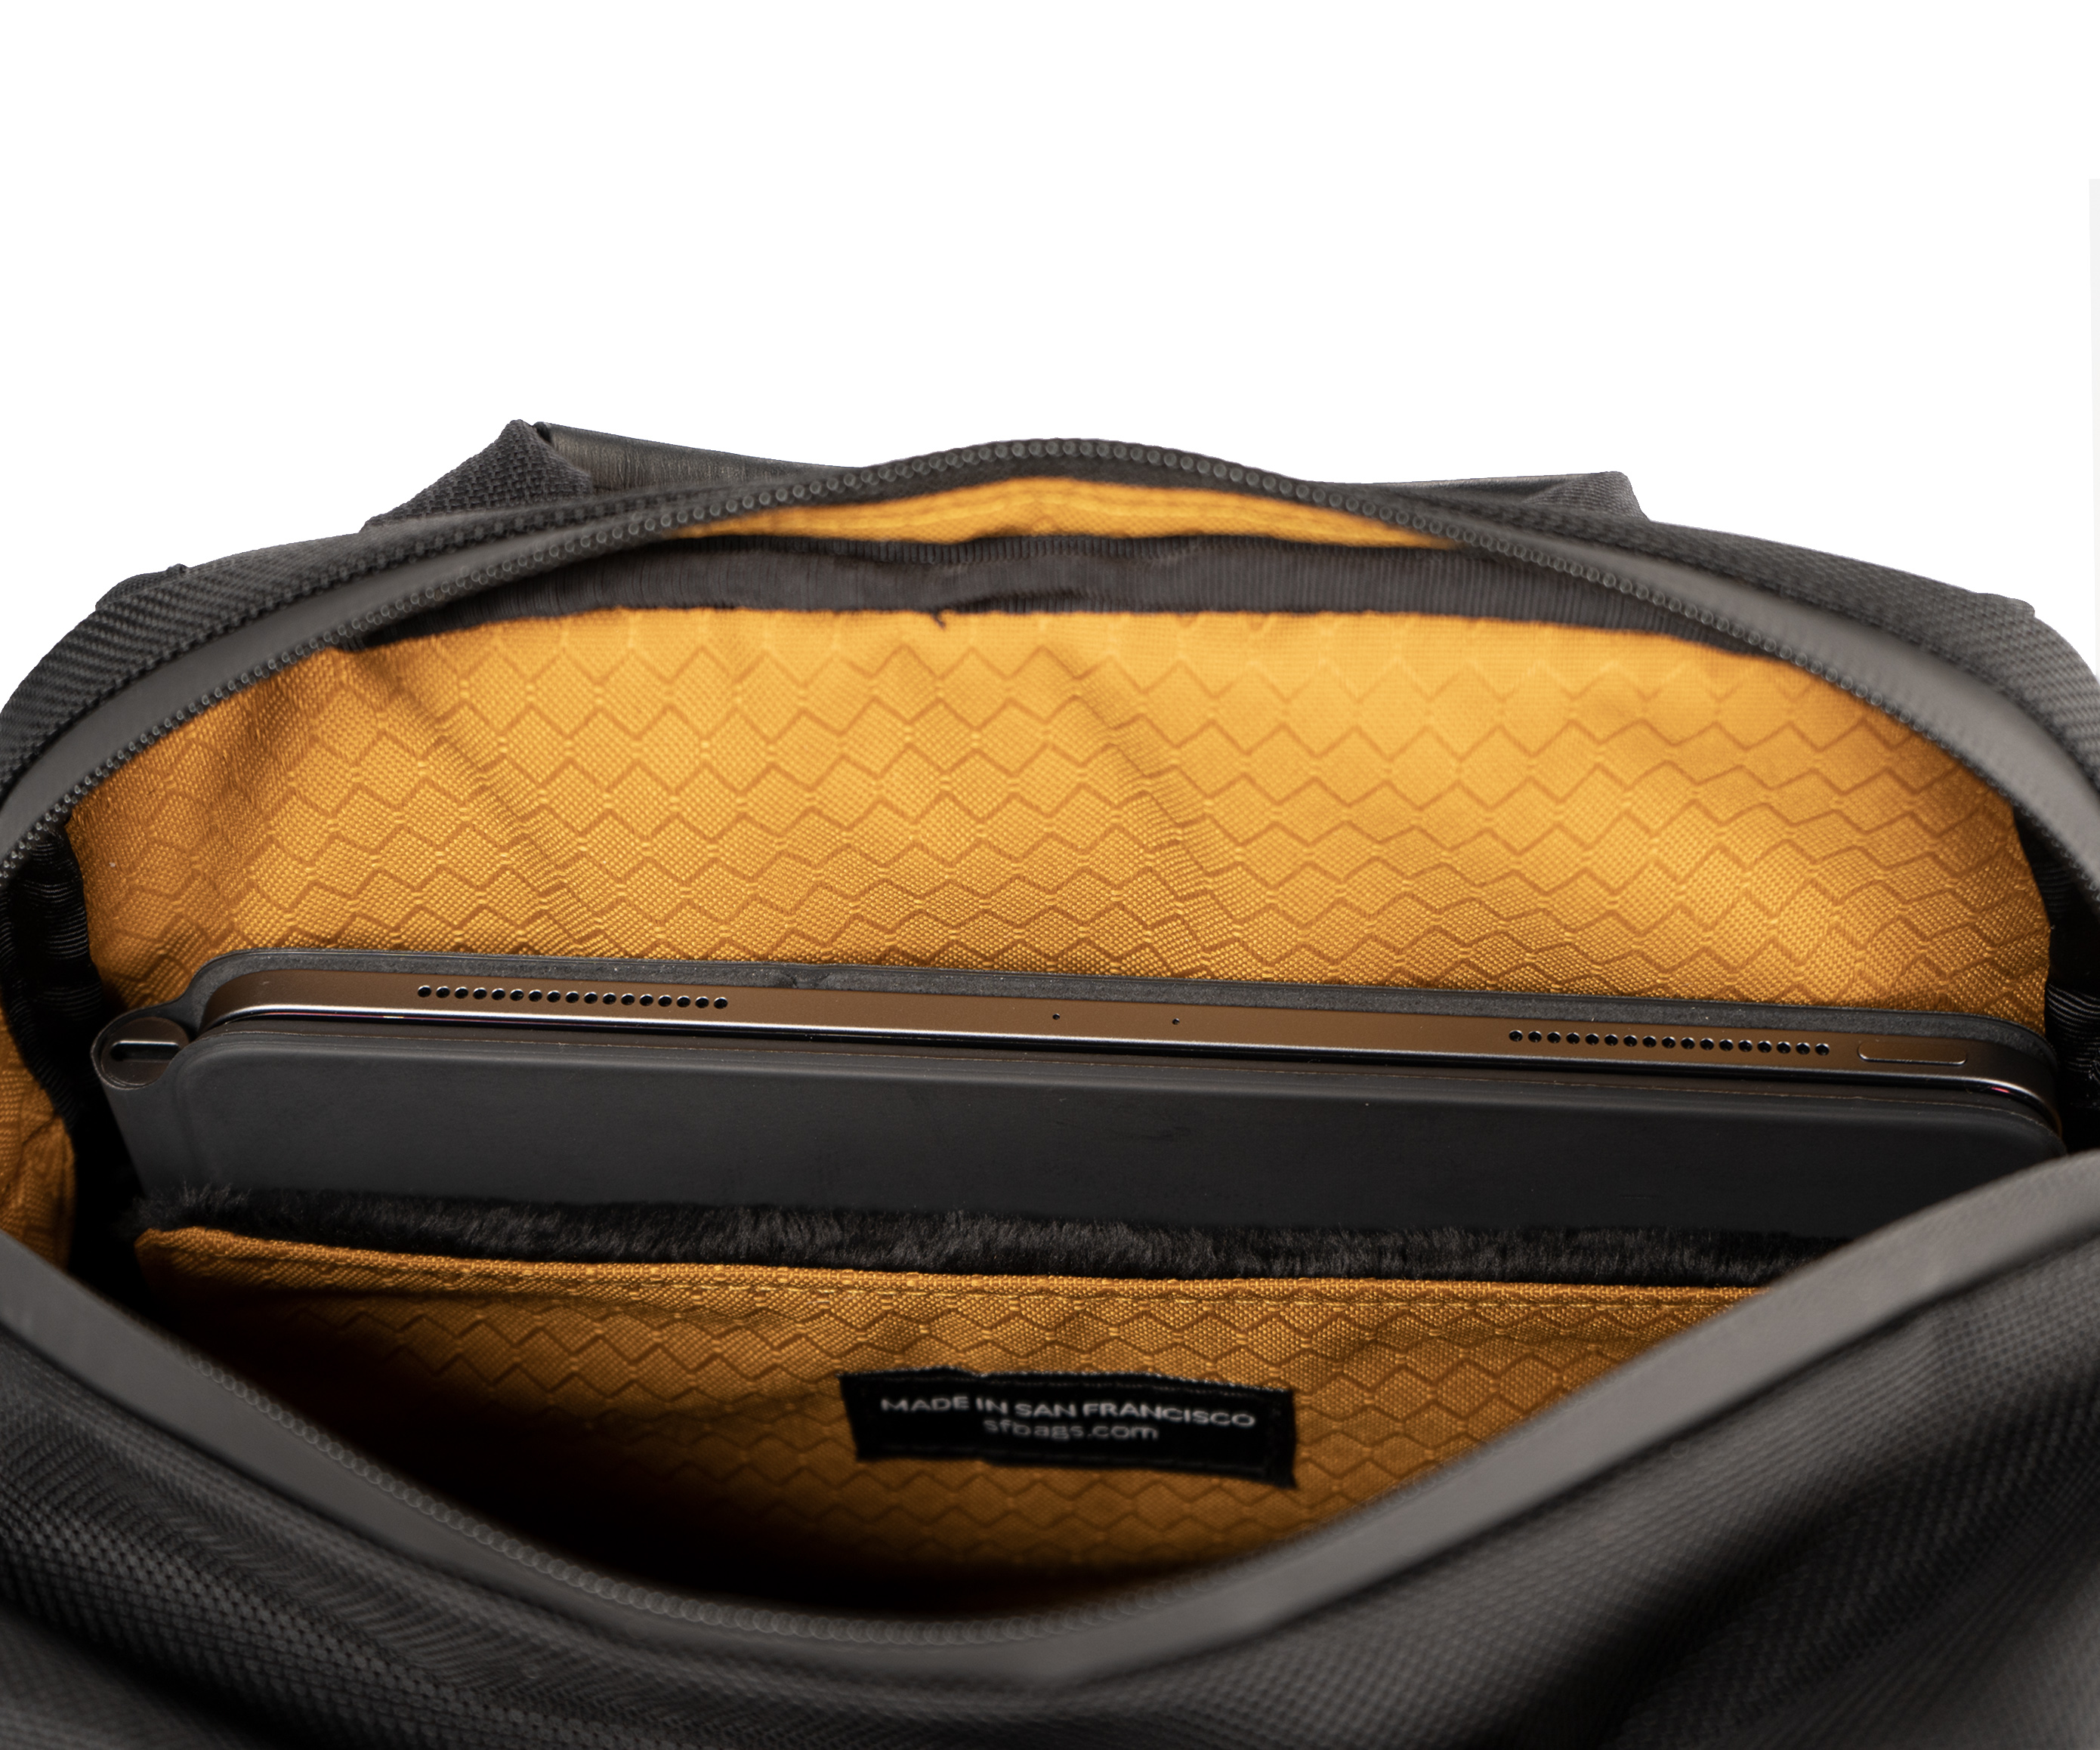 Plush-lined, foam-padded laptop compartment